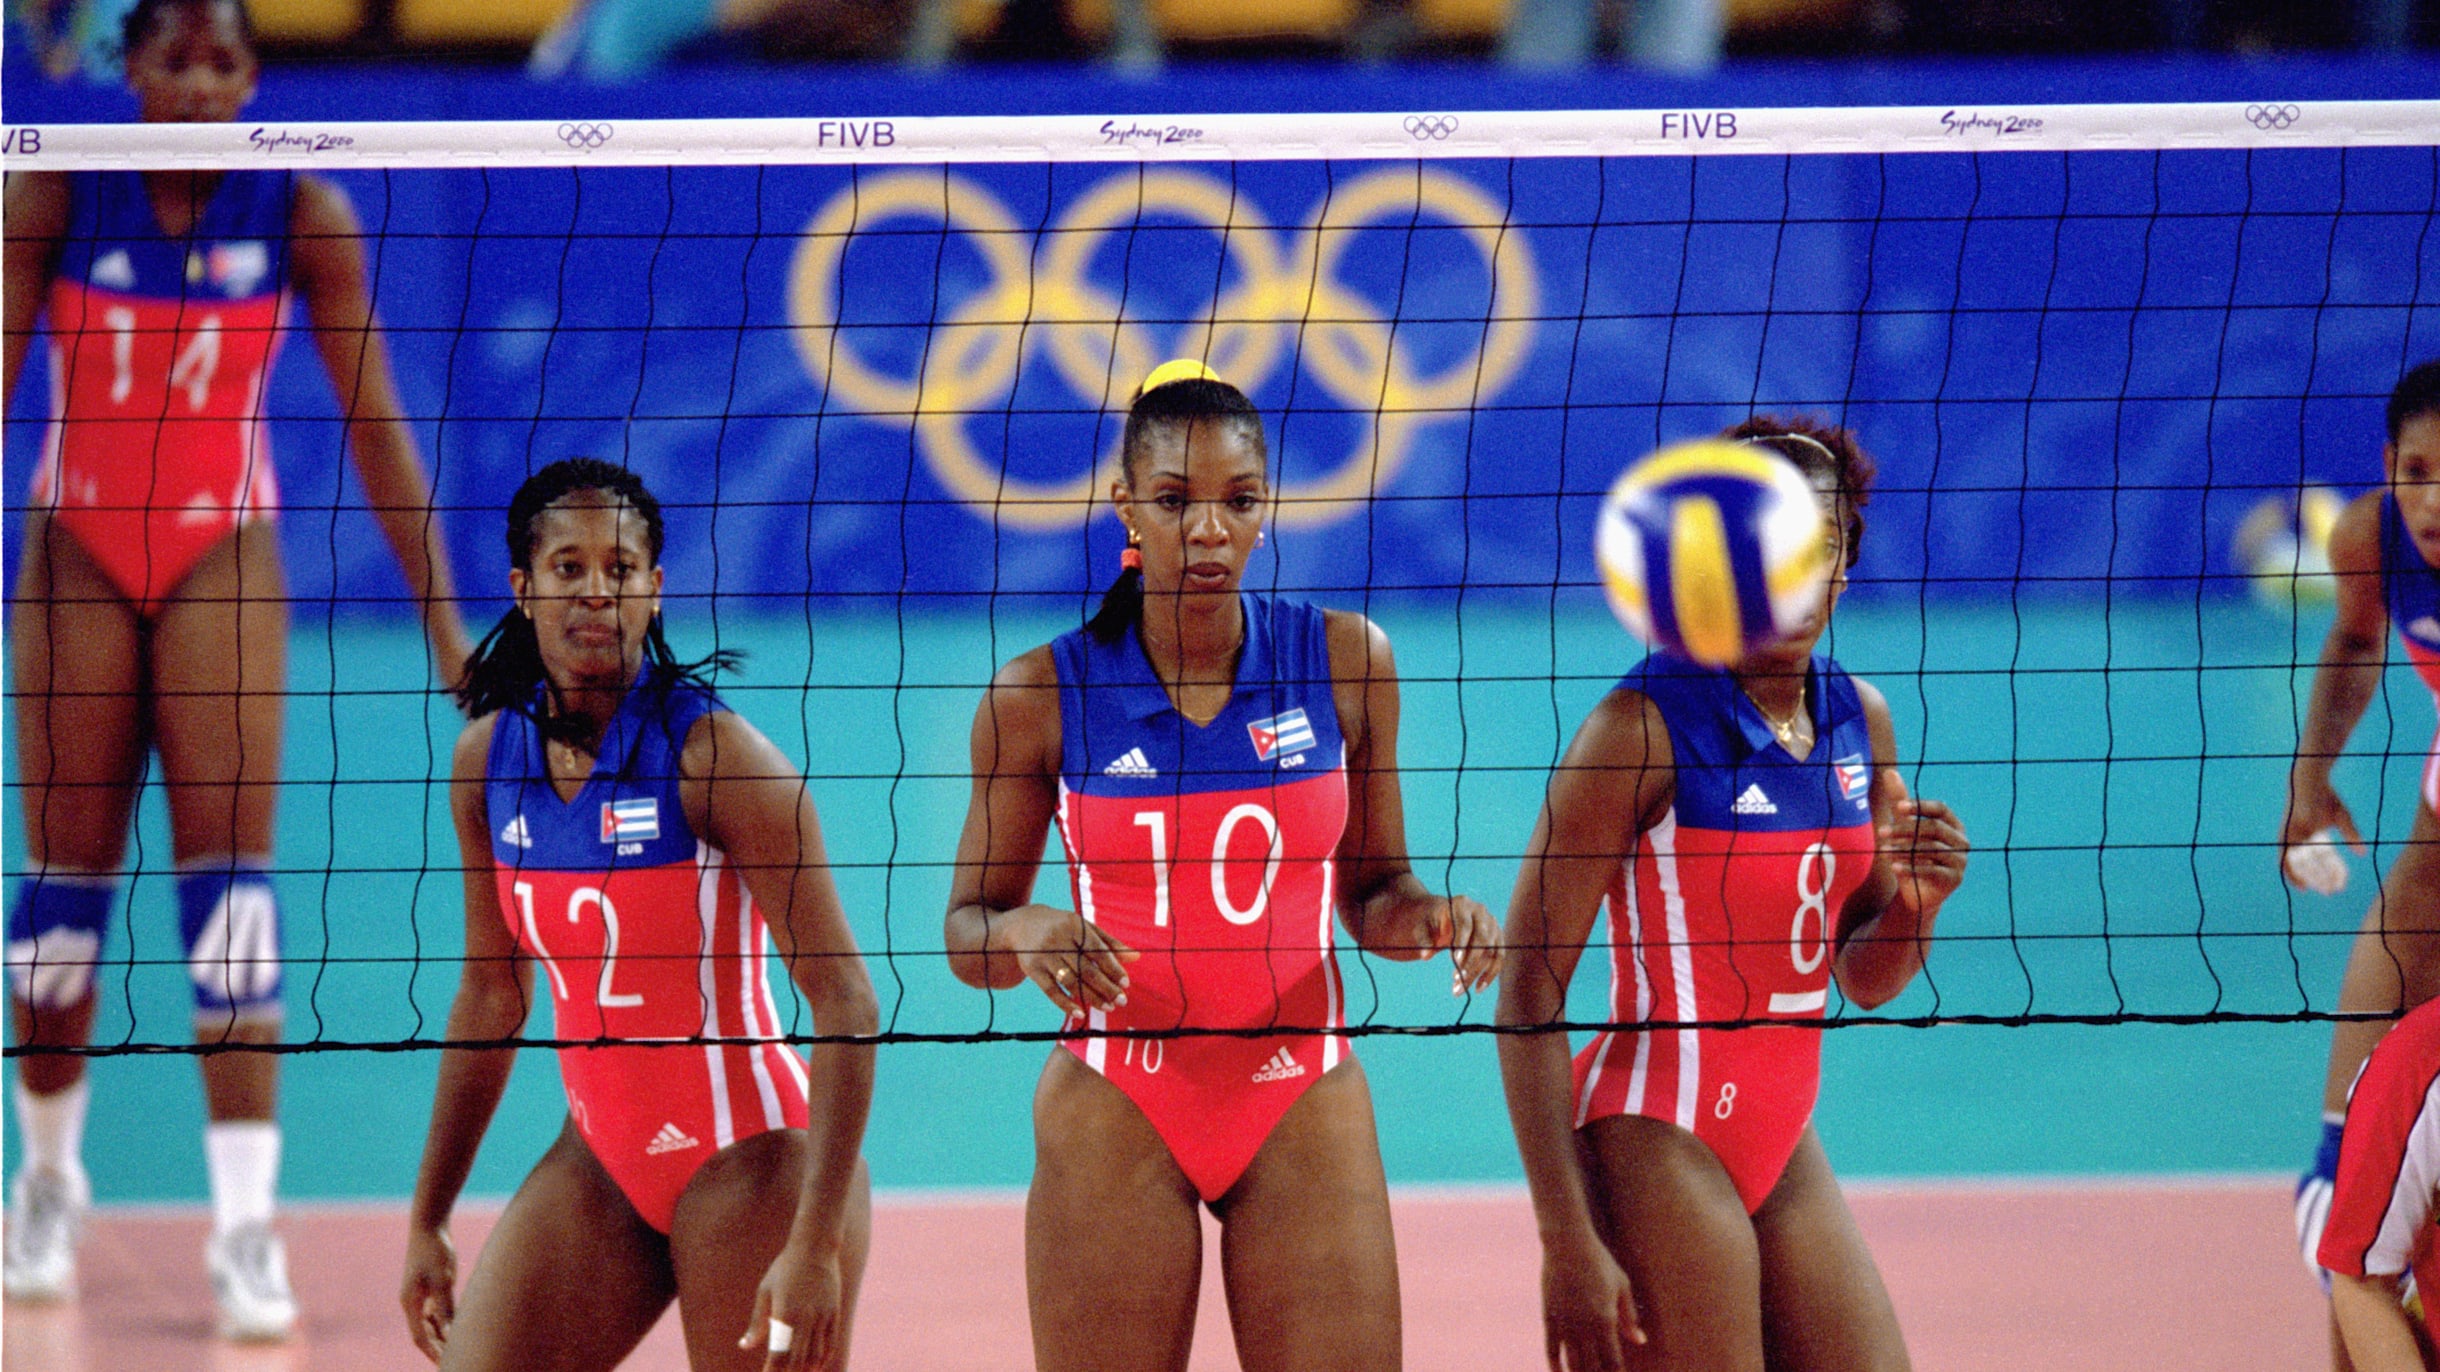 Why does one volleyball player have a different color jersey at the  Olympics?